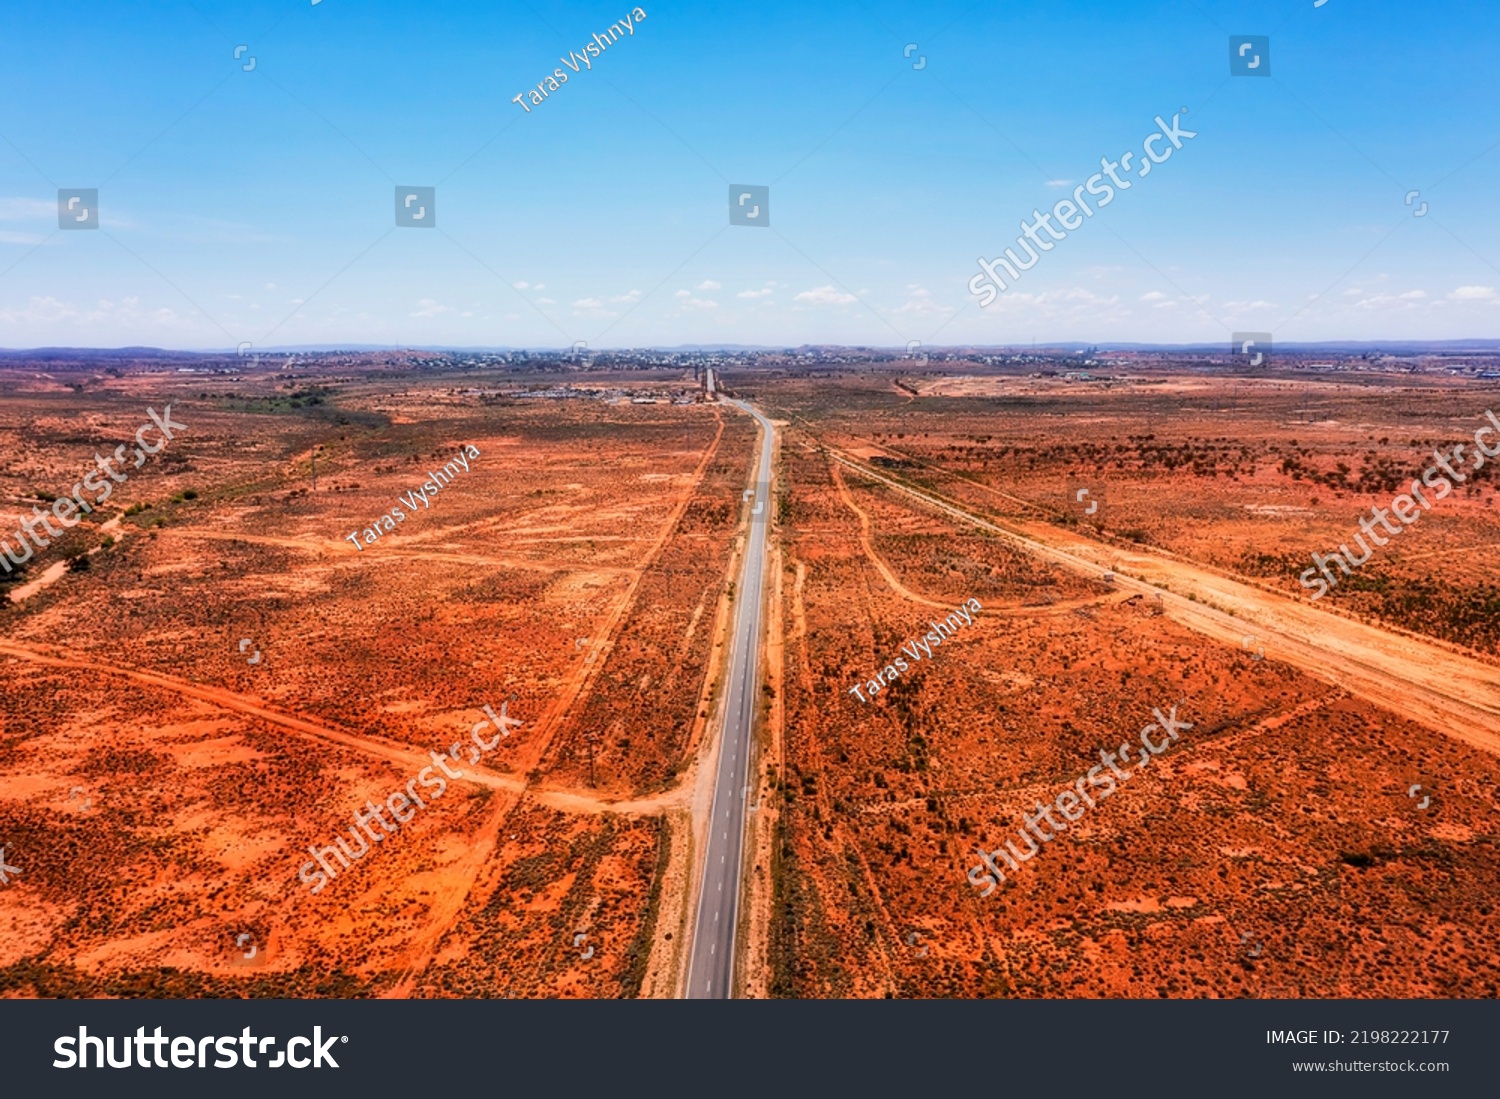 Silver city highway from Adelaide to Broken hill at entrance to Broken Hill city in australian red soil outback. #2198222177